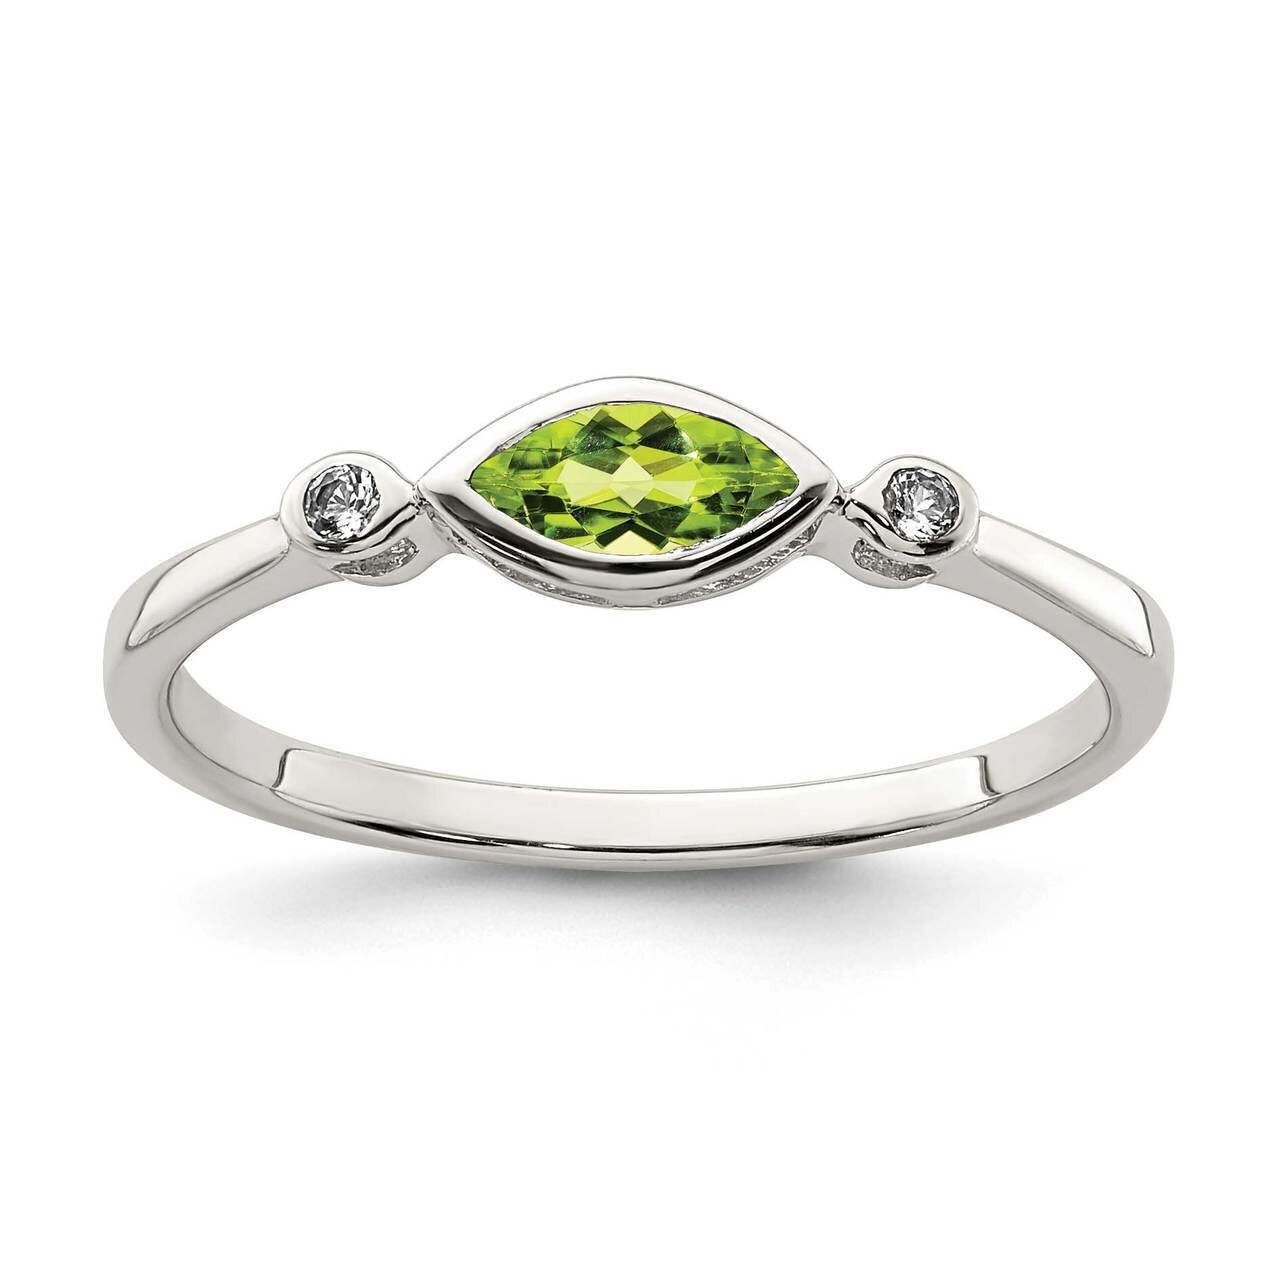 Peridot and White Topaz Ring Sterling Silver Polished QR7065AUG